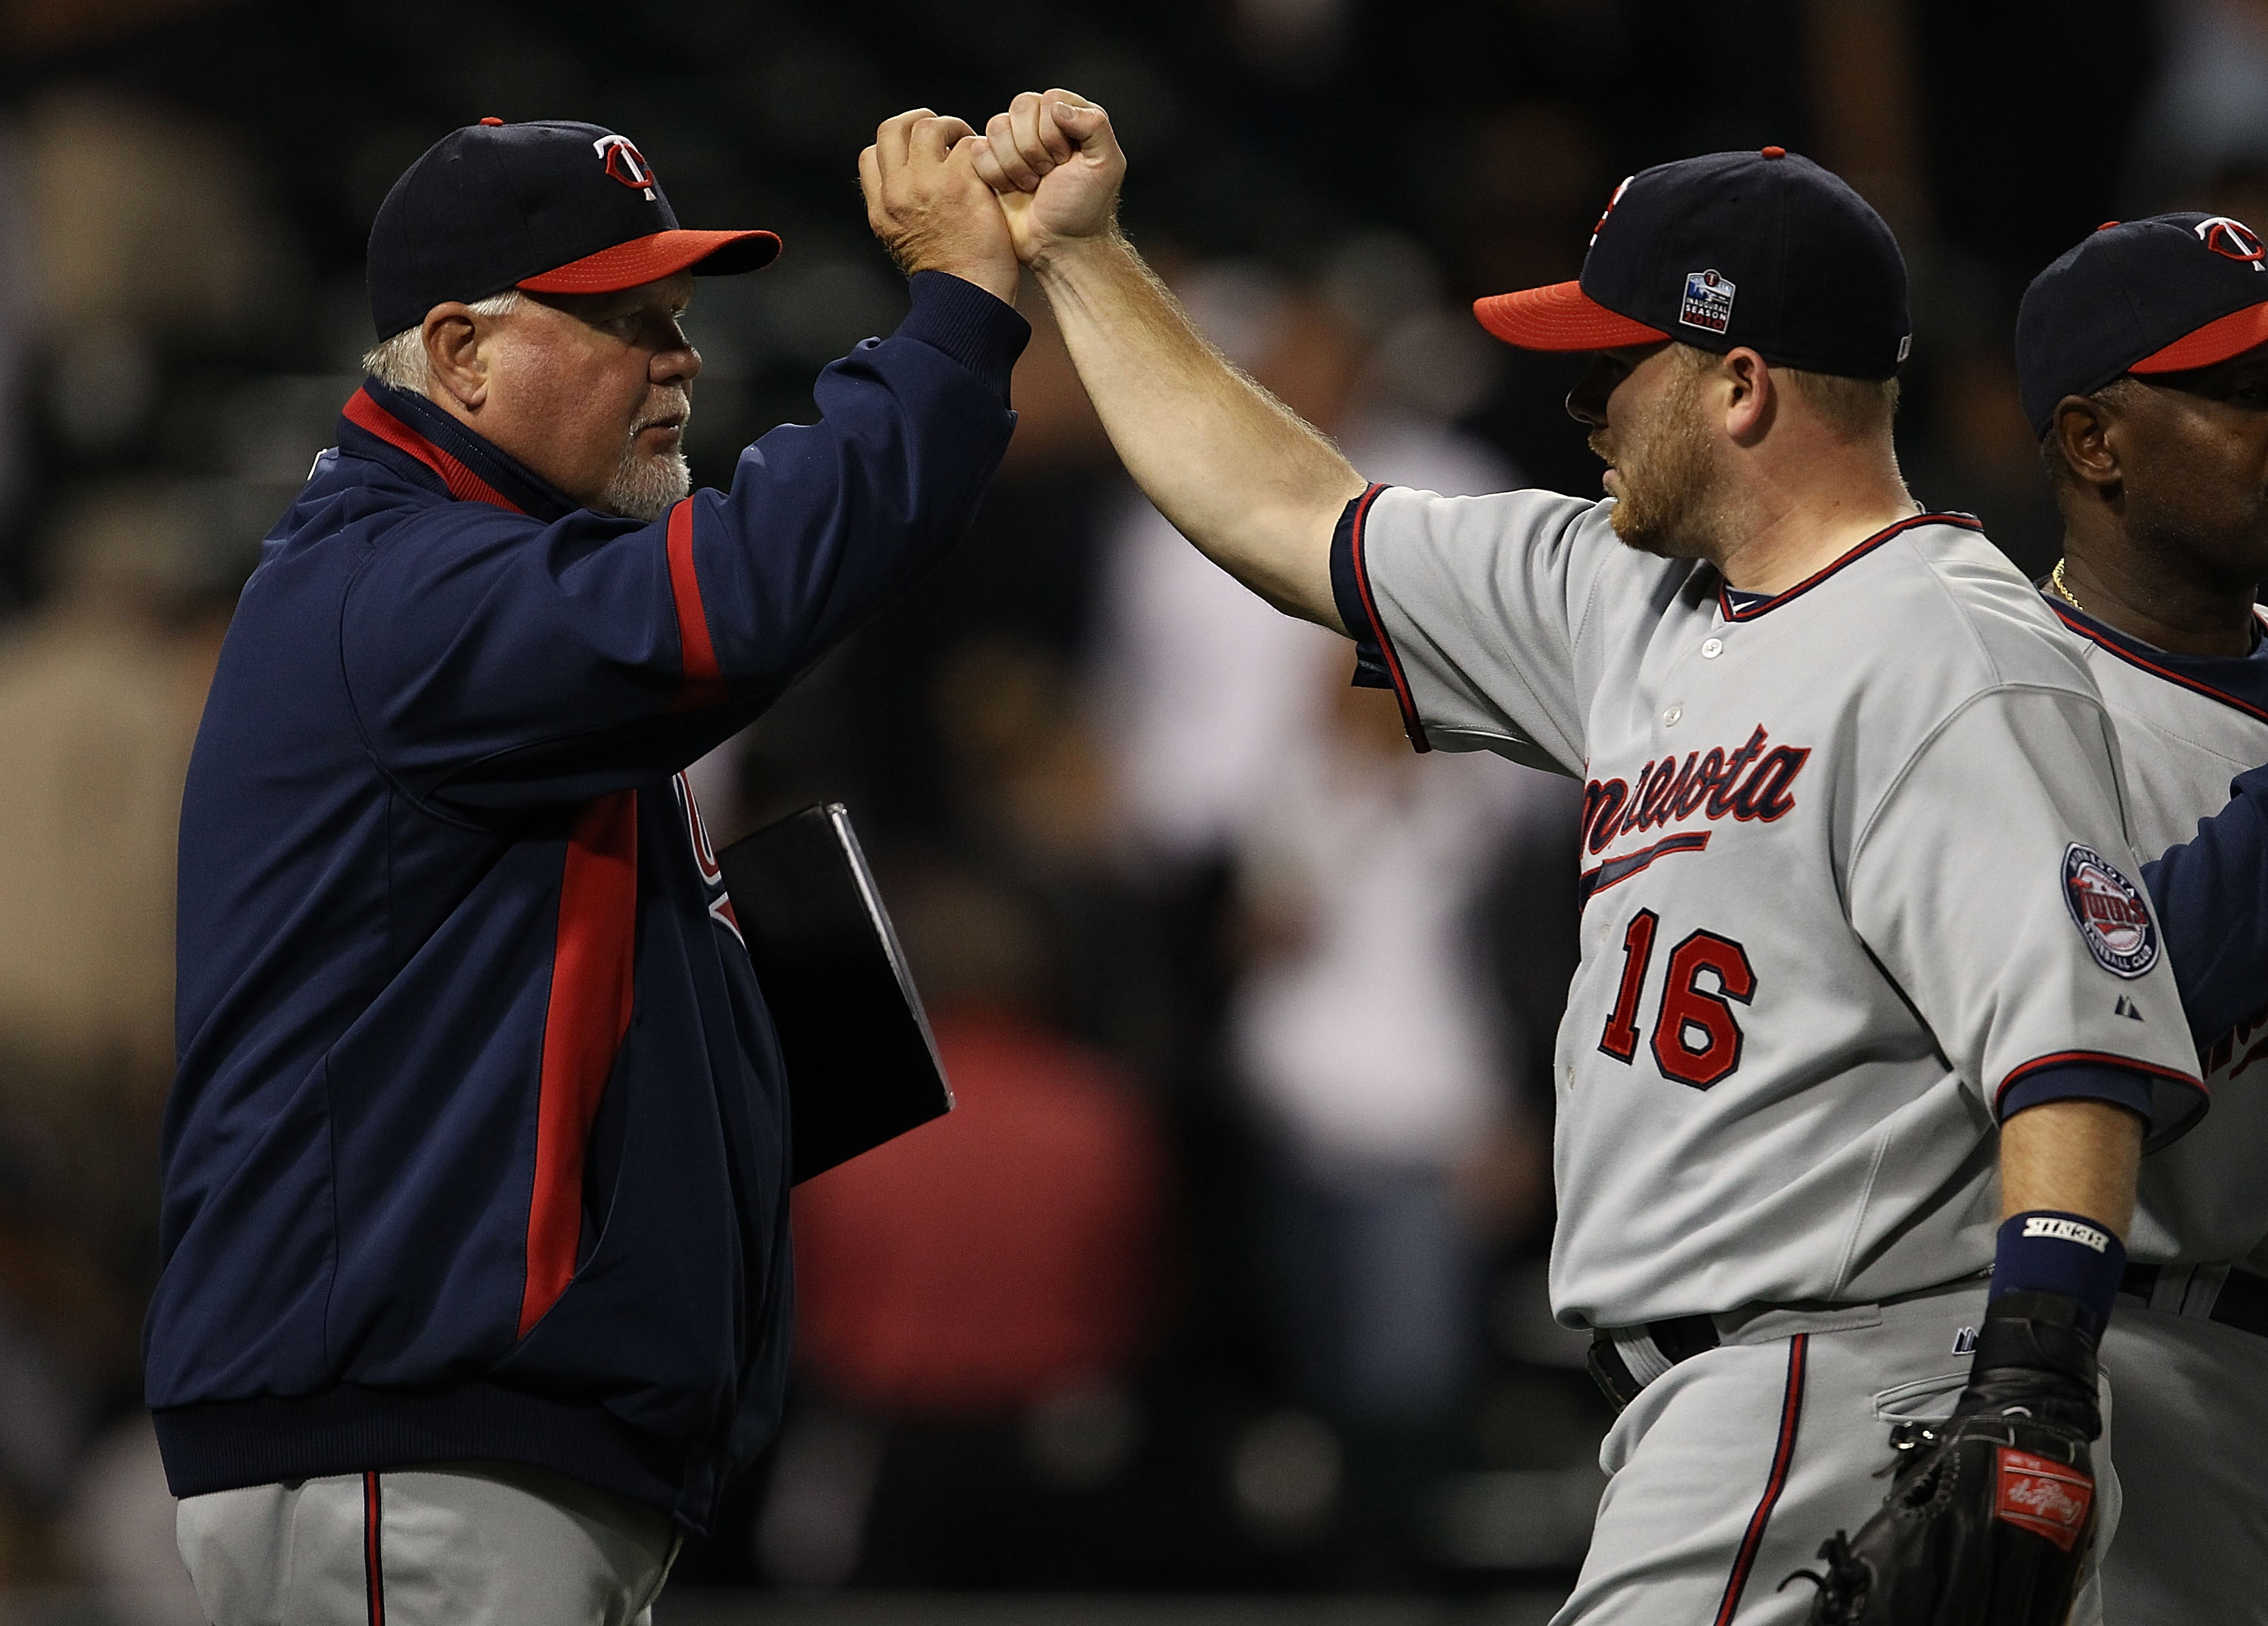 CHICAGO - SEPTEMBER 14: Manager Ron Gardenhire #35 of the Minnesota Twins congratulates Jason Kubel #16 after a win over the Chicago White Sox at U.S. Cellular Field on September 14, 2010 in Chicago, Illinois. The Twins defeated the White Sox 9-3. (Photo